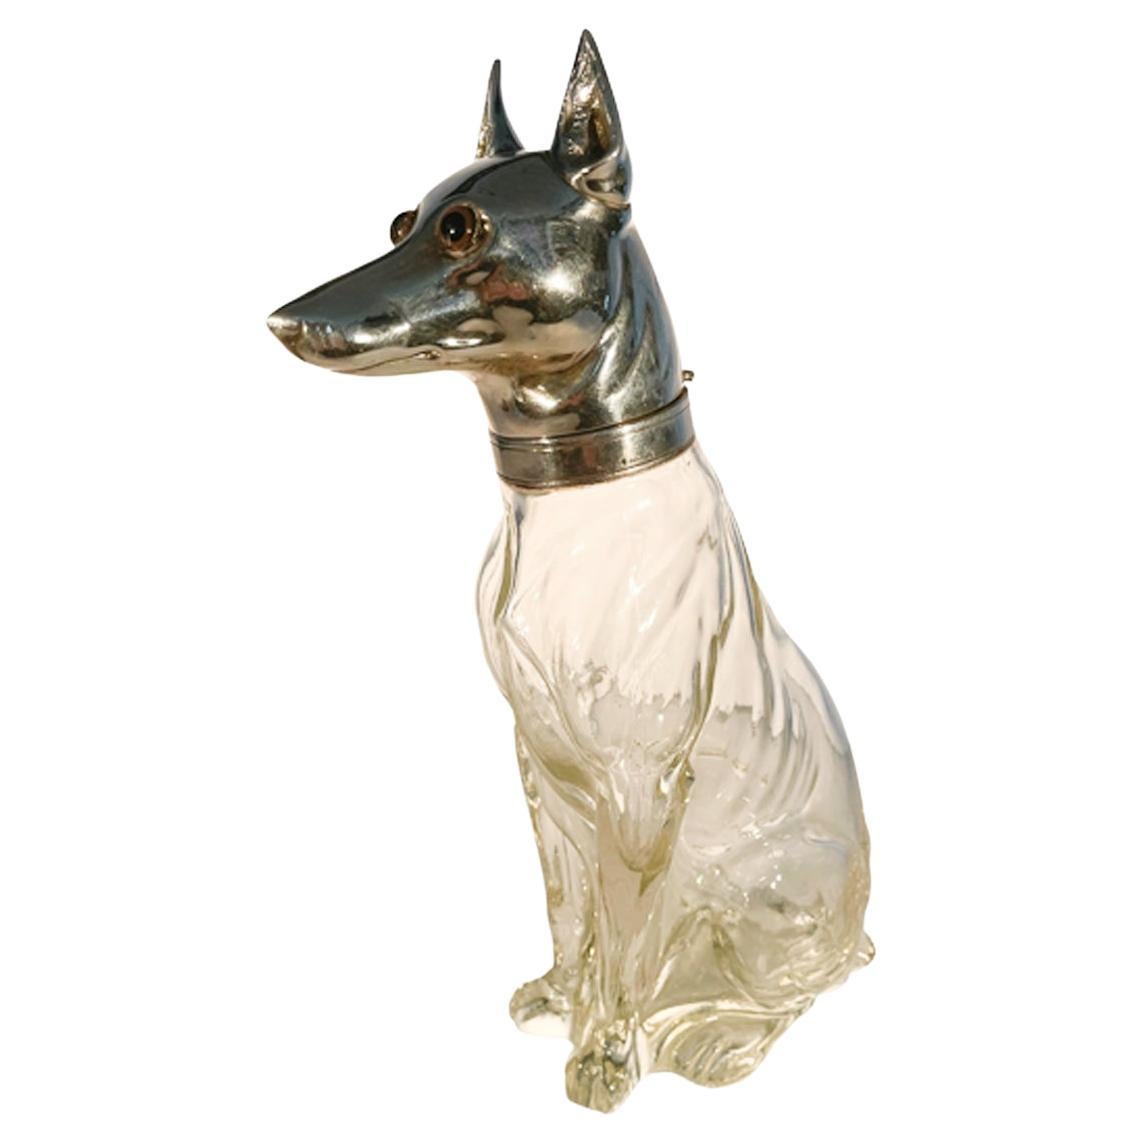 Art Deco Greyhound or Whippet Decanter Glass w/Silver Plate Head with Glass Eyes